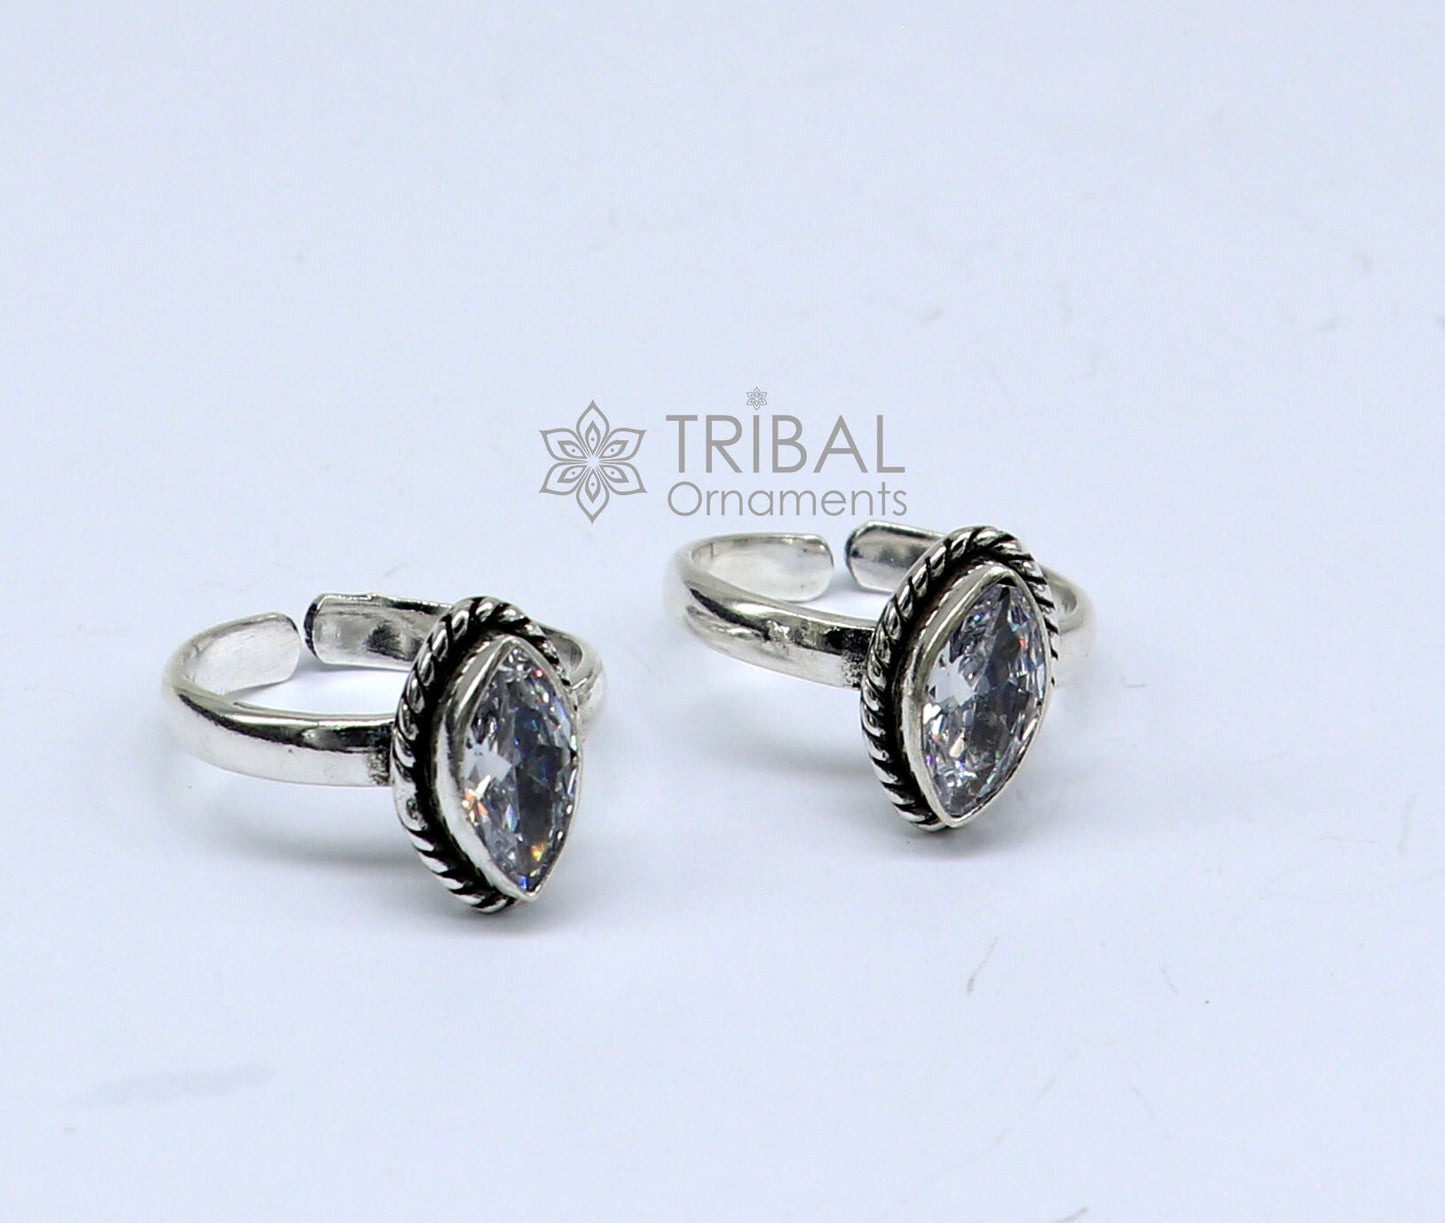 925 sterling silver adjustable size toe ring band Cubic zircon stone tribal belly dance ethnic cultural  jewelry from india ntr88 - TRIBAL ORNAMENTS